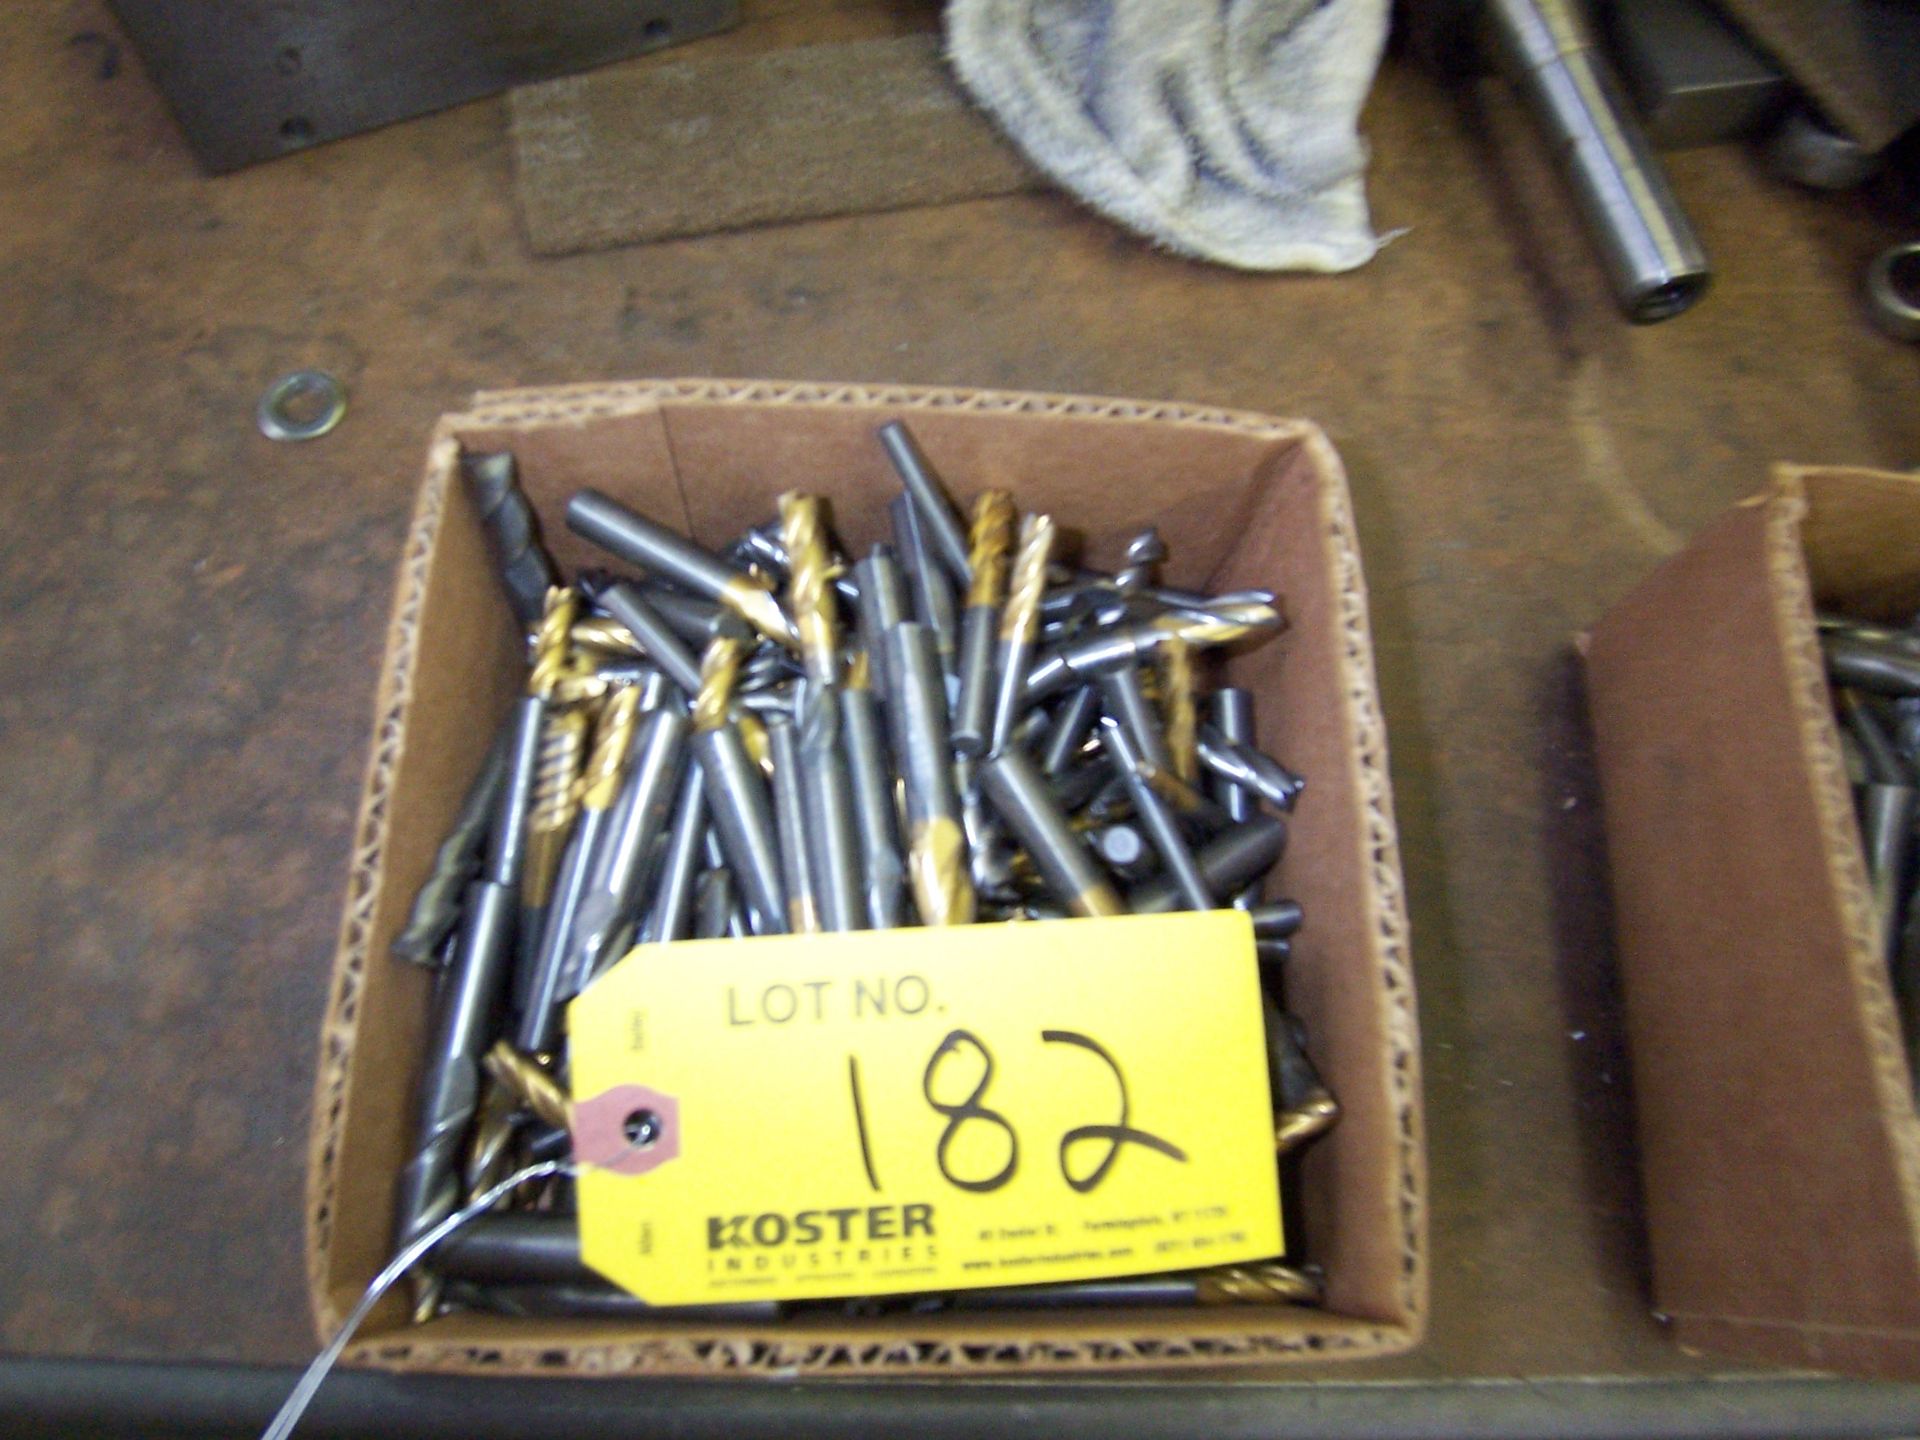 LOT OF ASSORTED CARBIDE END MILLS